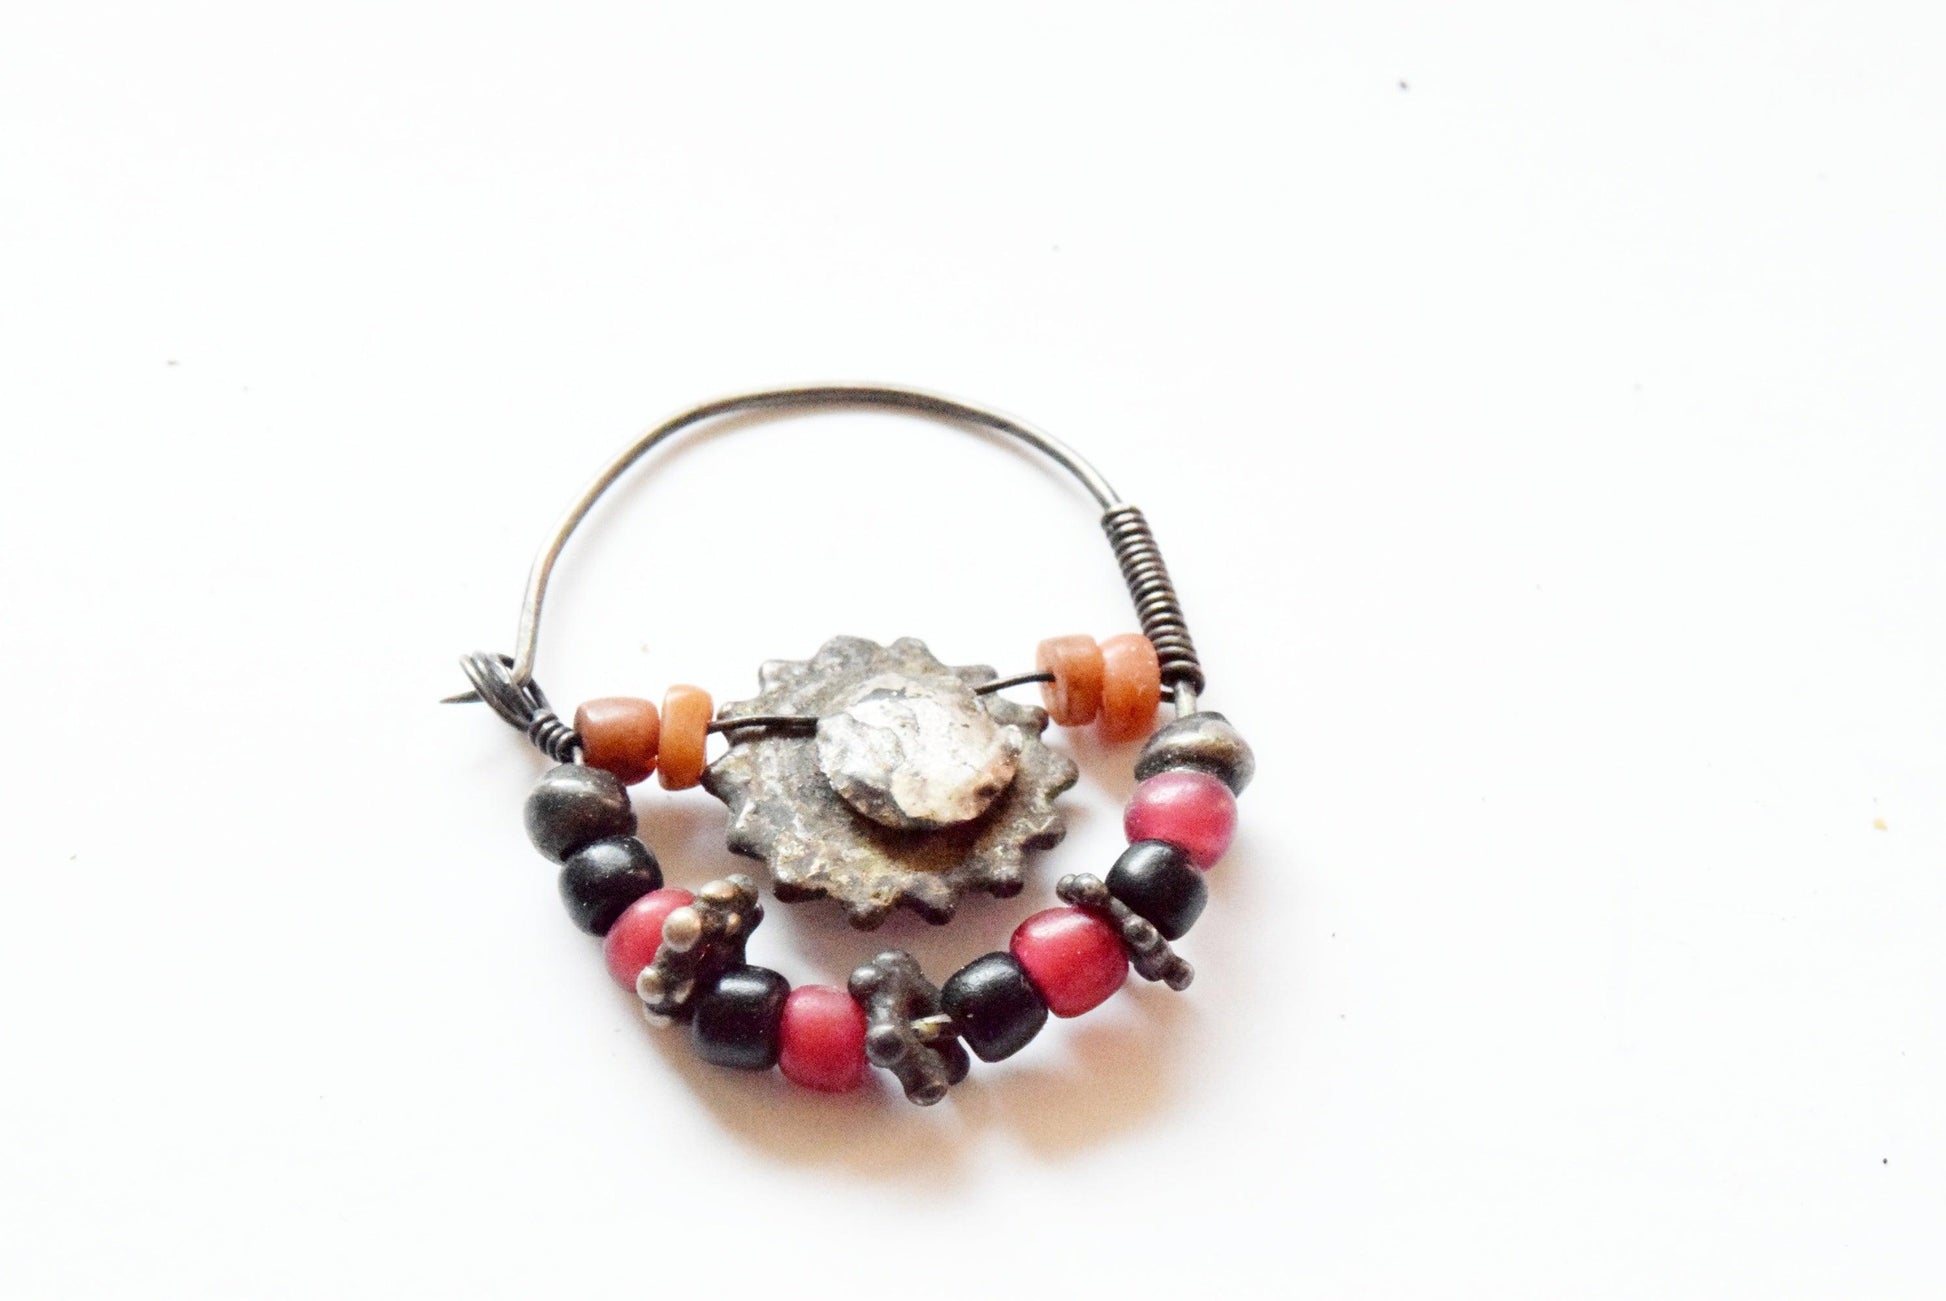 Antique Silver and Coral Uzbek Nose Ring with Black and Red Beads - Anteeka